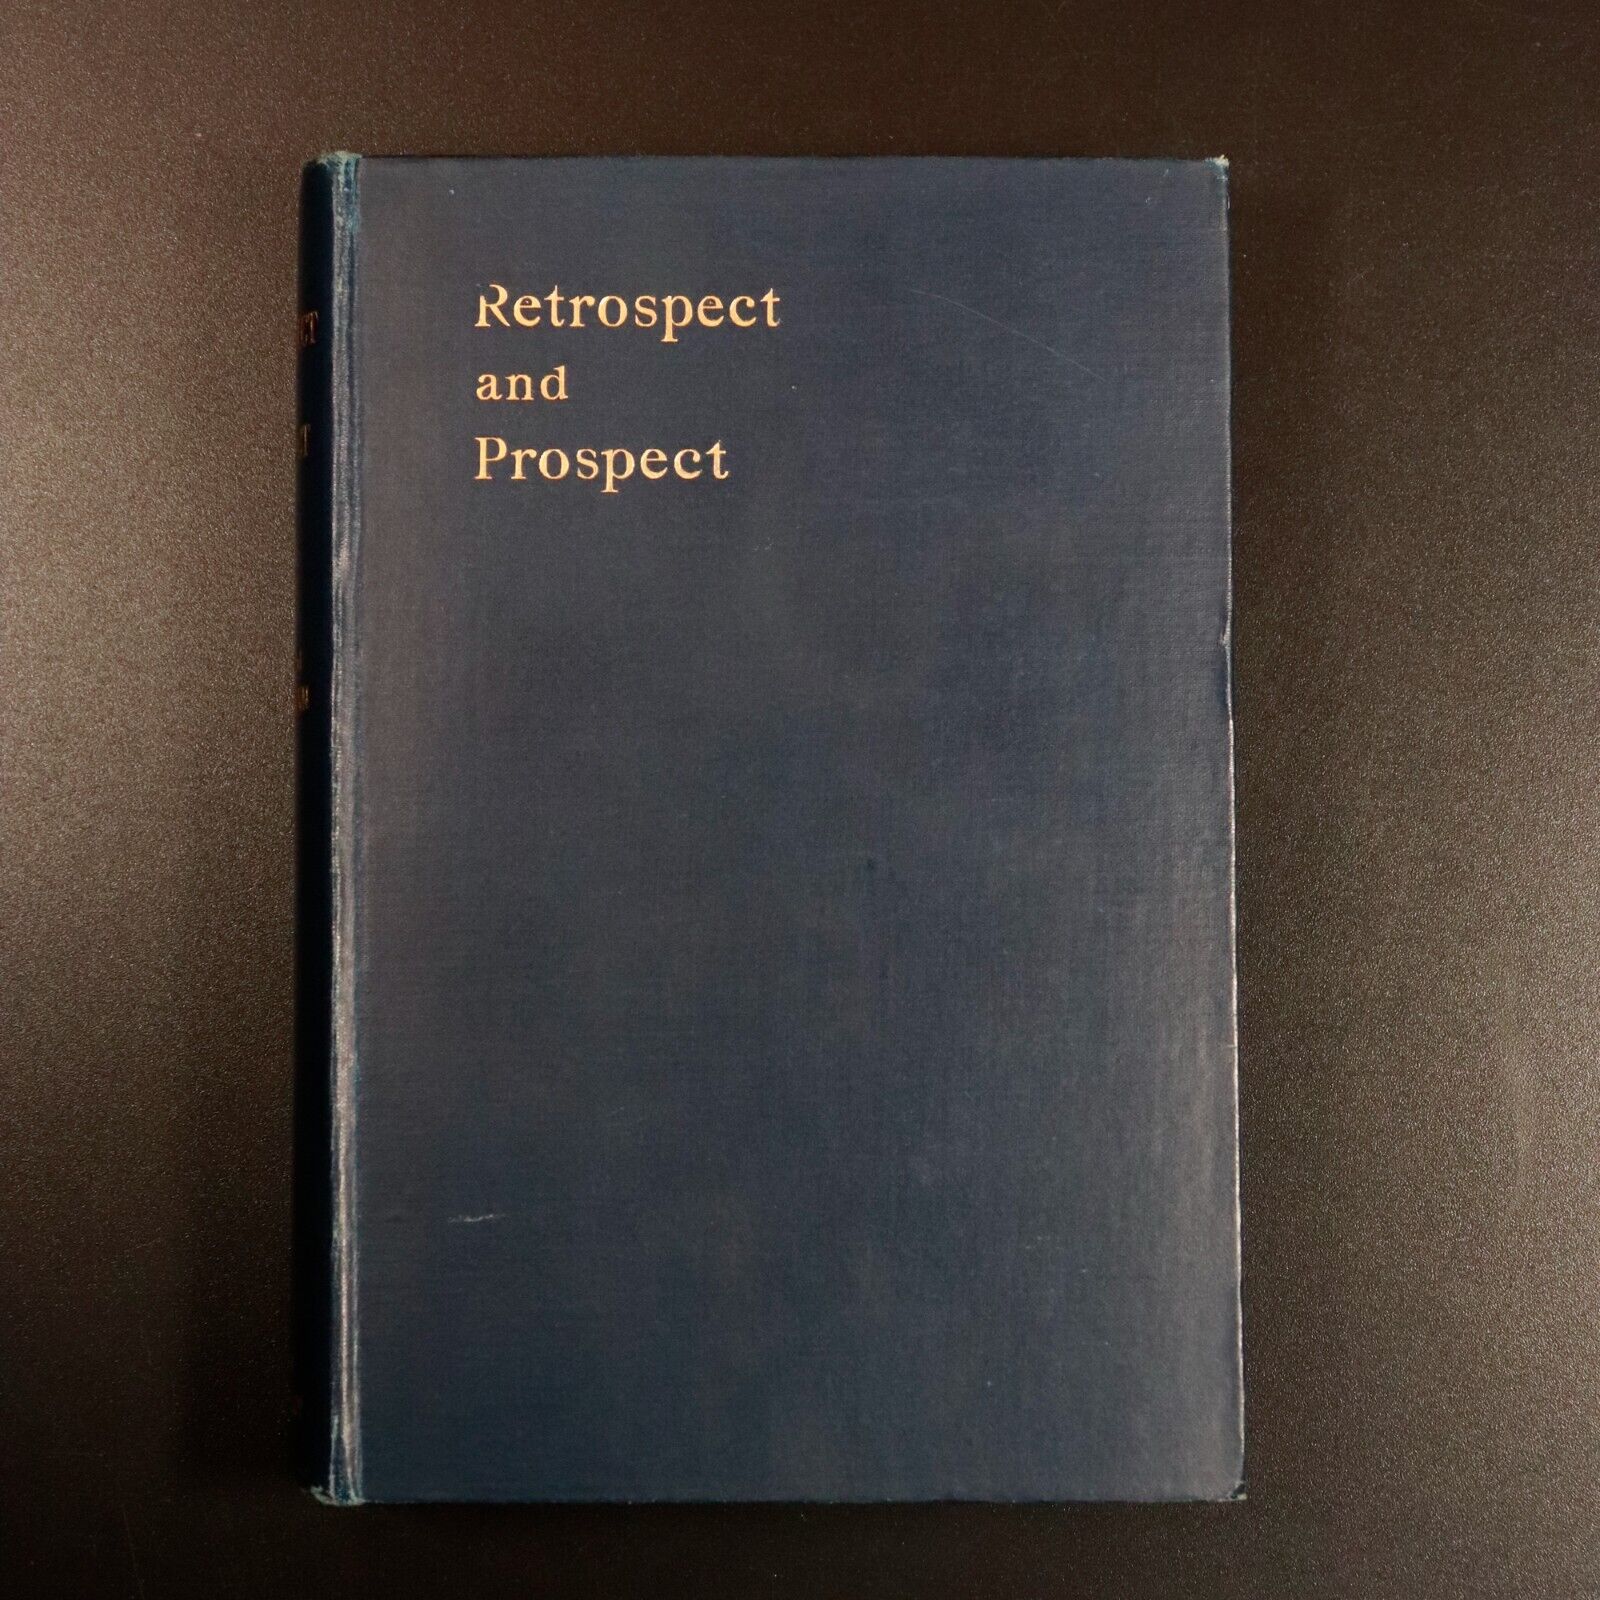 1902 Retrospect & Prospect by A.T. Mahan Antique Military History Book